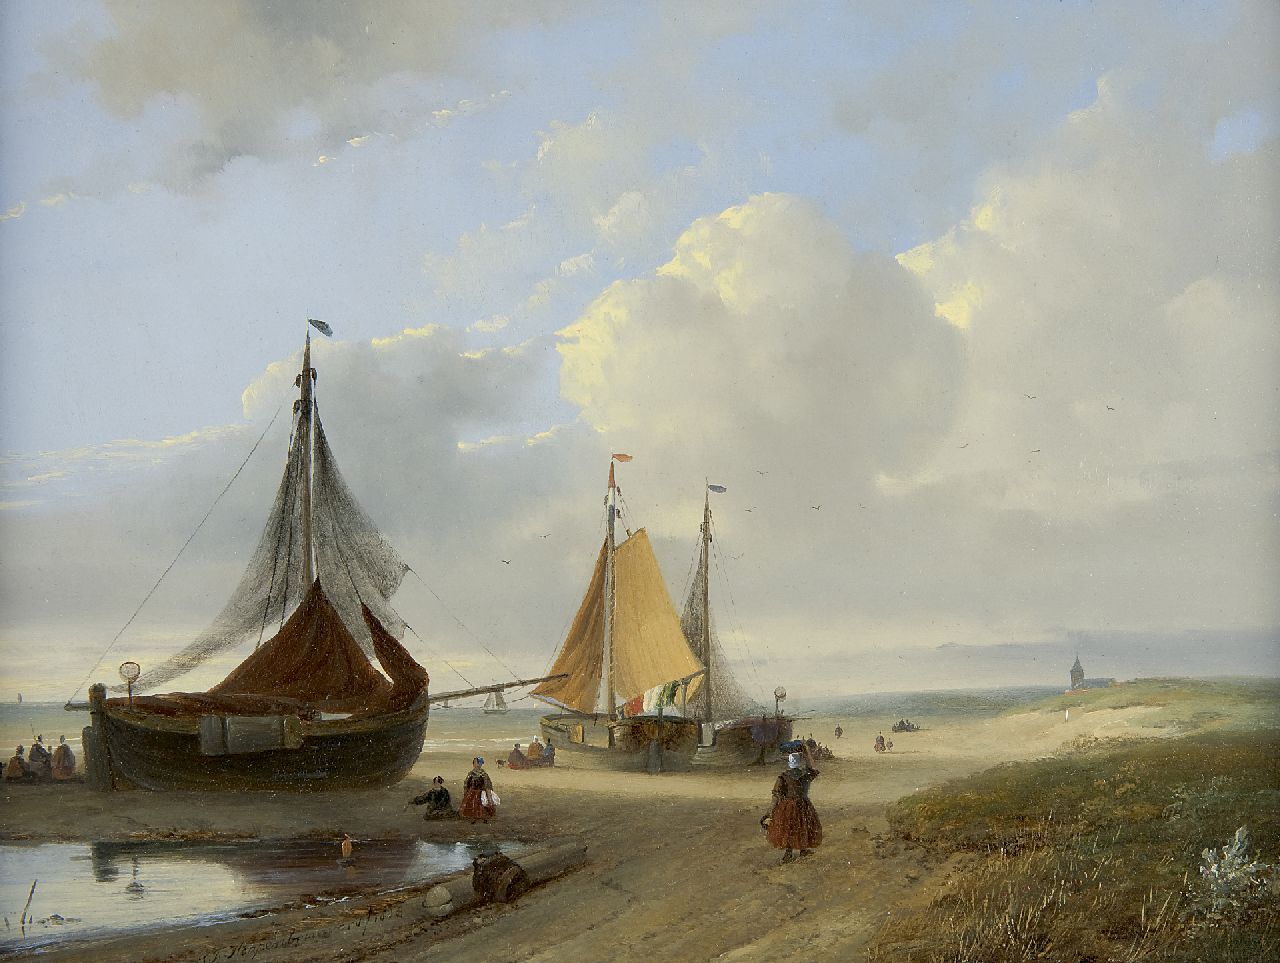 Hoppenbrouwers J.F.  | Johannes Franciscus Hoppenbrouwers, Fishing boats on the beach, oil on panel 28.4 x 37.4 cm, signed l.l. and dated 1853